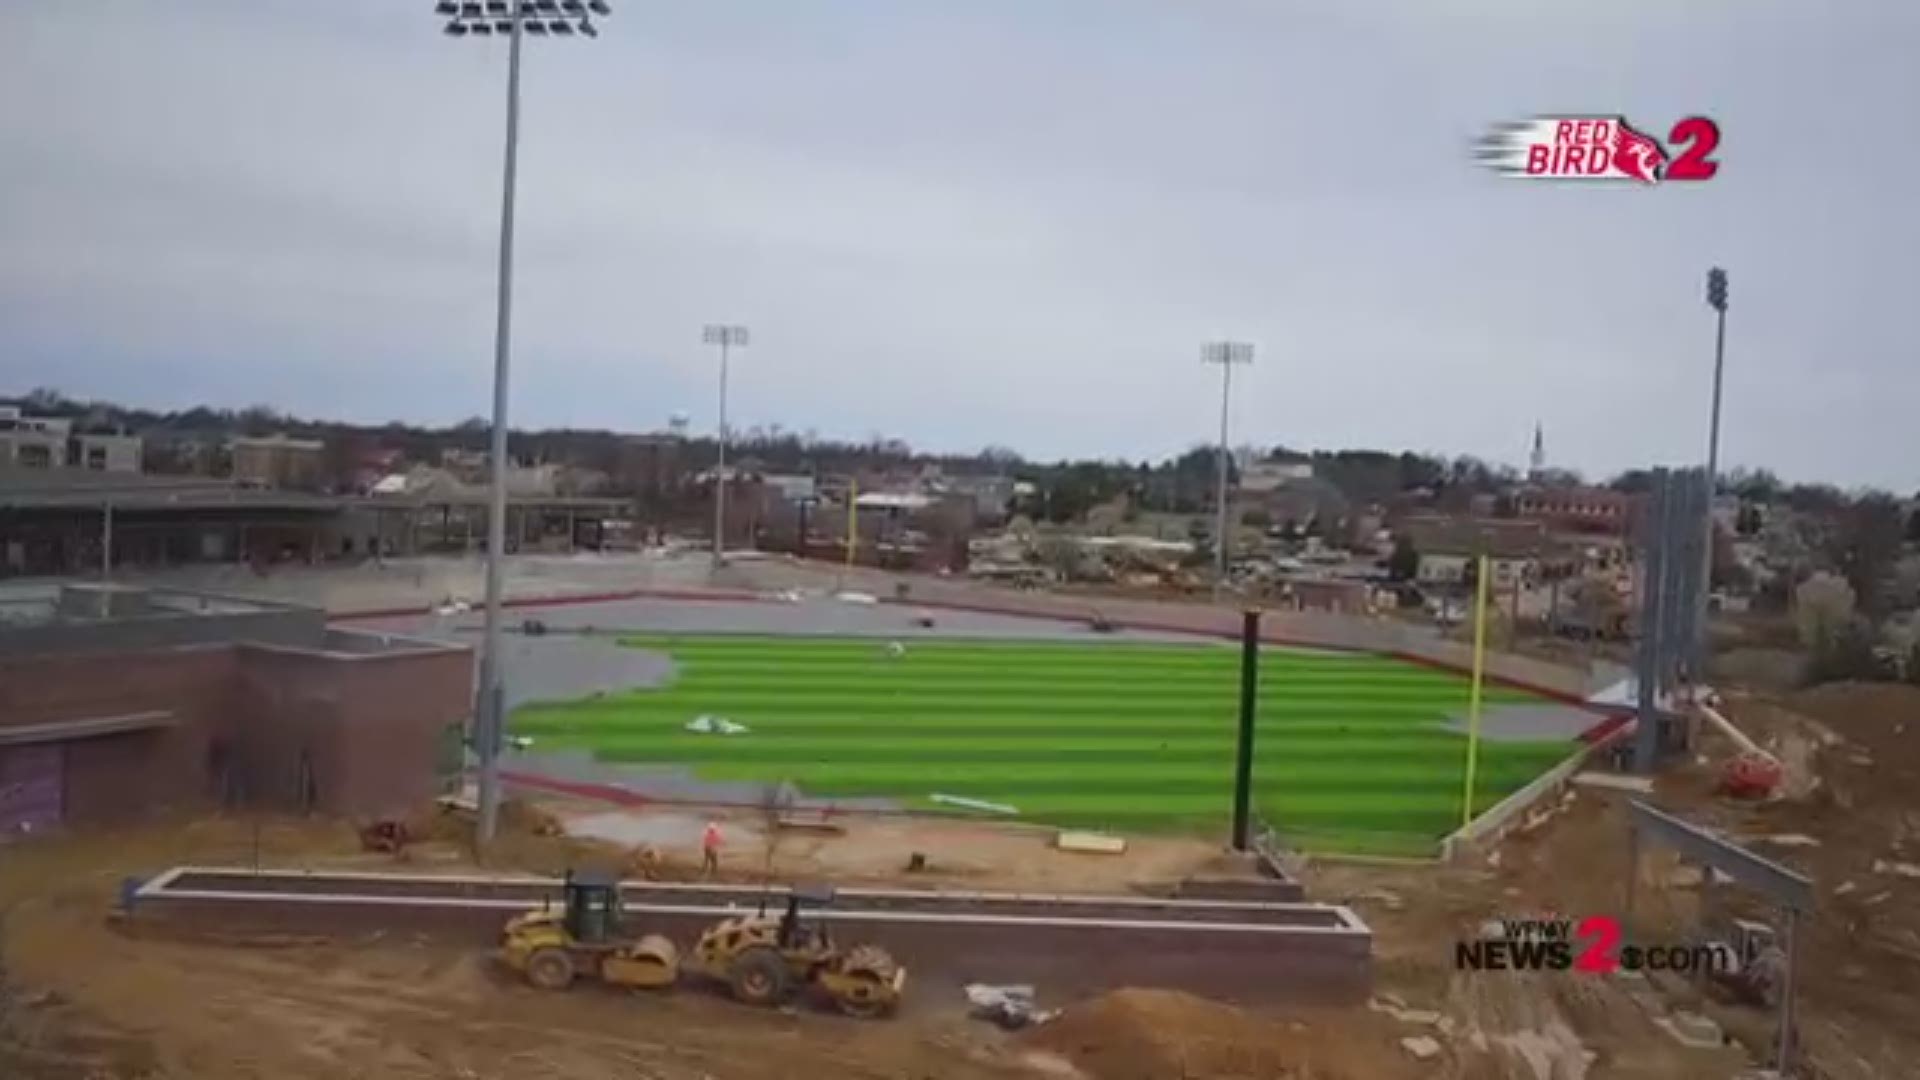 Red Bird 2 drone view captures the new turf being installed at BB&T Point in High Point. The High Point Rockers will kick-off their first season in the spring.